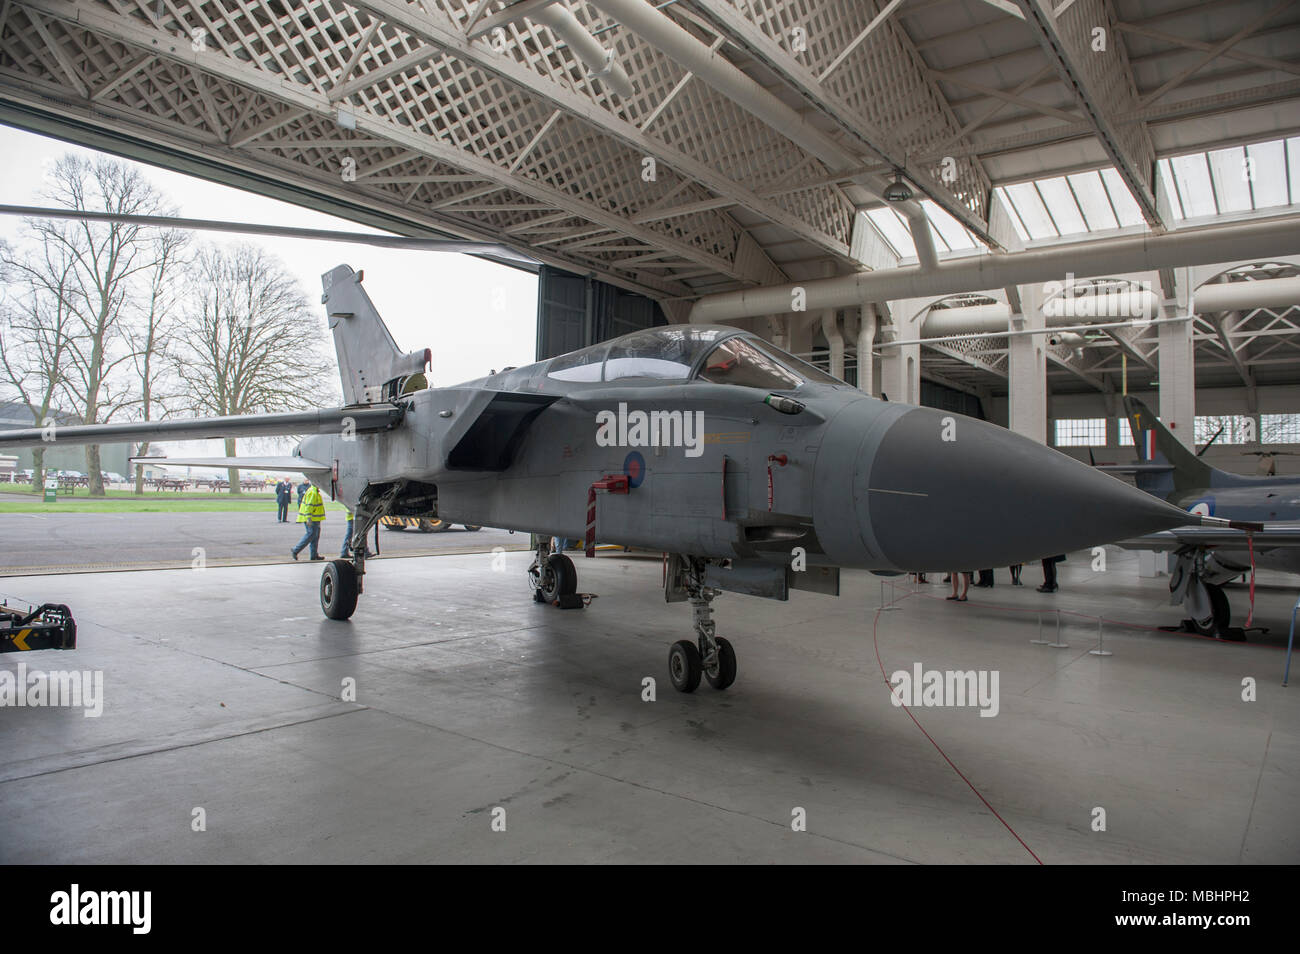 IWM Duxford, Cambridgeshire, UK. 11 April 2018. Imperial War Museums, working with RAF Marham, add Tornado GR4 ZA469 to the displays at IWM Duxford. Tornado GR4 ZA469 is transported from the Conservation Hall in AirSpace to the Battle of Britain exhibition, where it goes on display to visitors from 11 April 2018. The Tornado GR4 is the most significant combat jet used by the RAF during the last 27 years and continues in service until 2019. Credit: Malcolm Park/Alamy Live News. Stock Photo